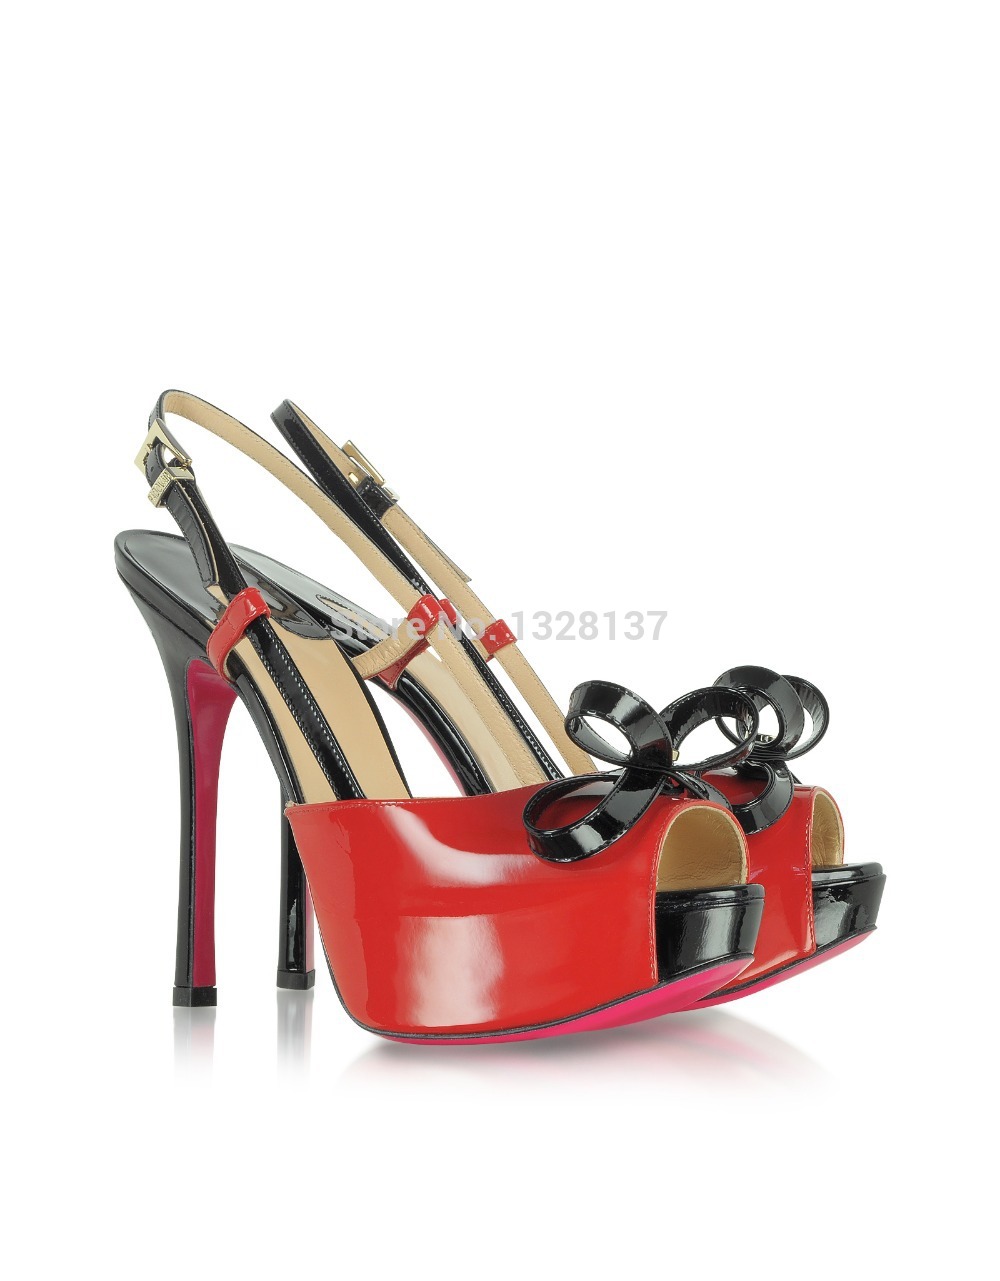 Cheap Red Bottom High Heel Shoes Promotion-Shop for Promotional ...